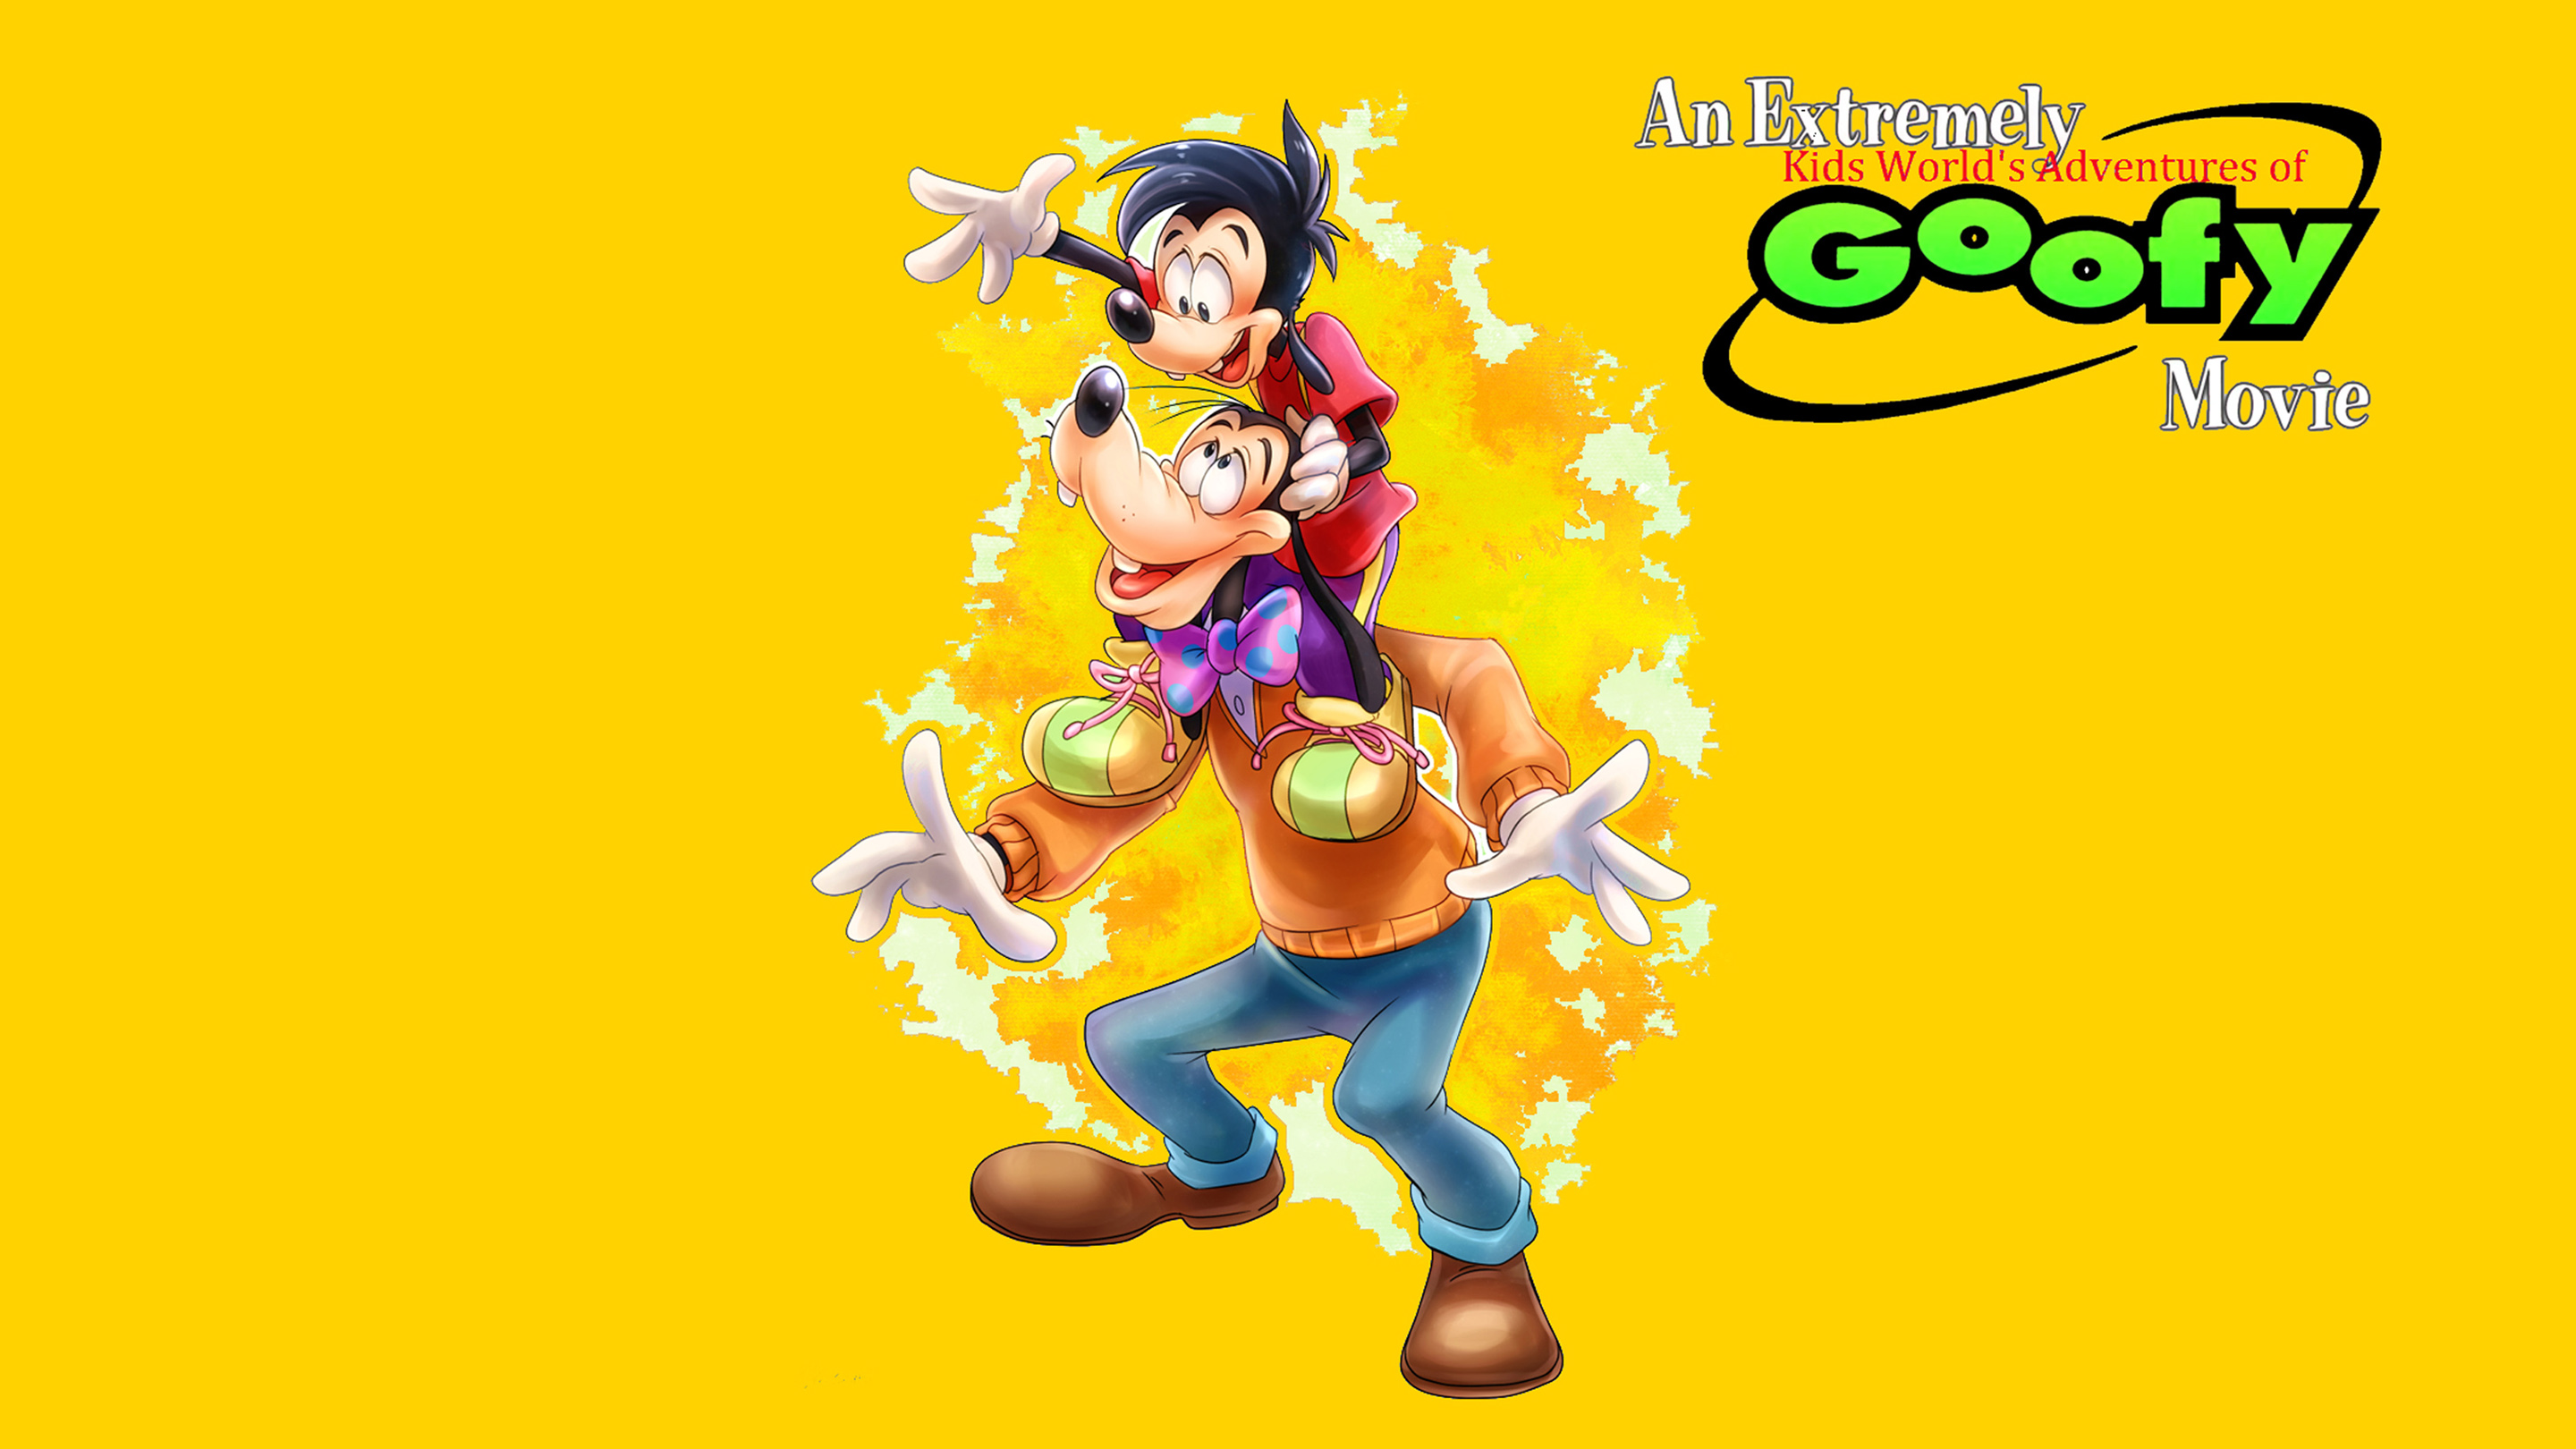 An Extremely Goofy Movie Goofy And Max Disney Cartoon Poster Wallpapers Hd  For Mobile Phones Tablet And Pc 2880x1620 : 